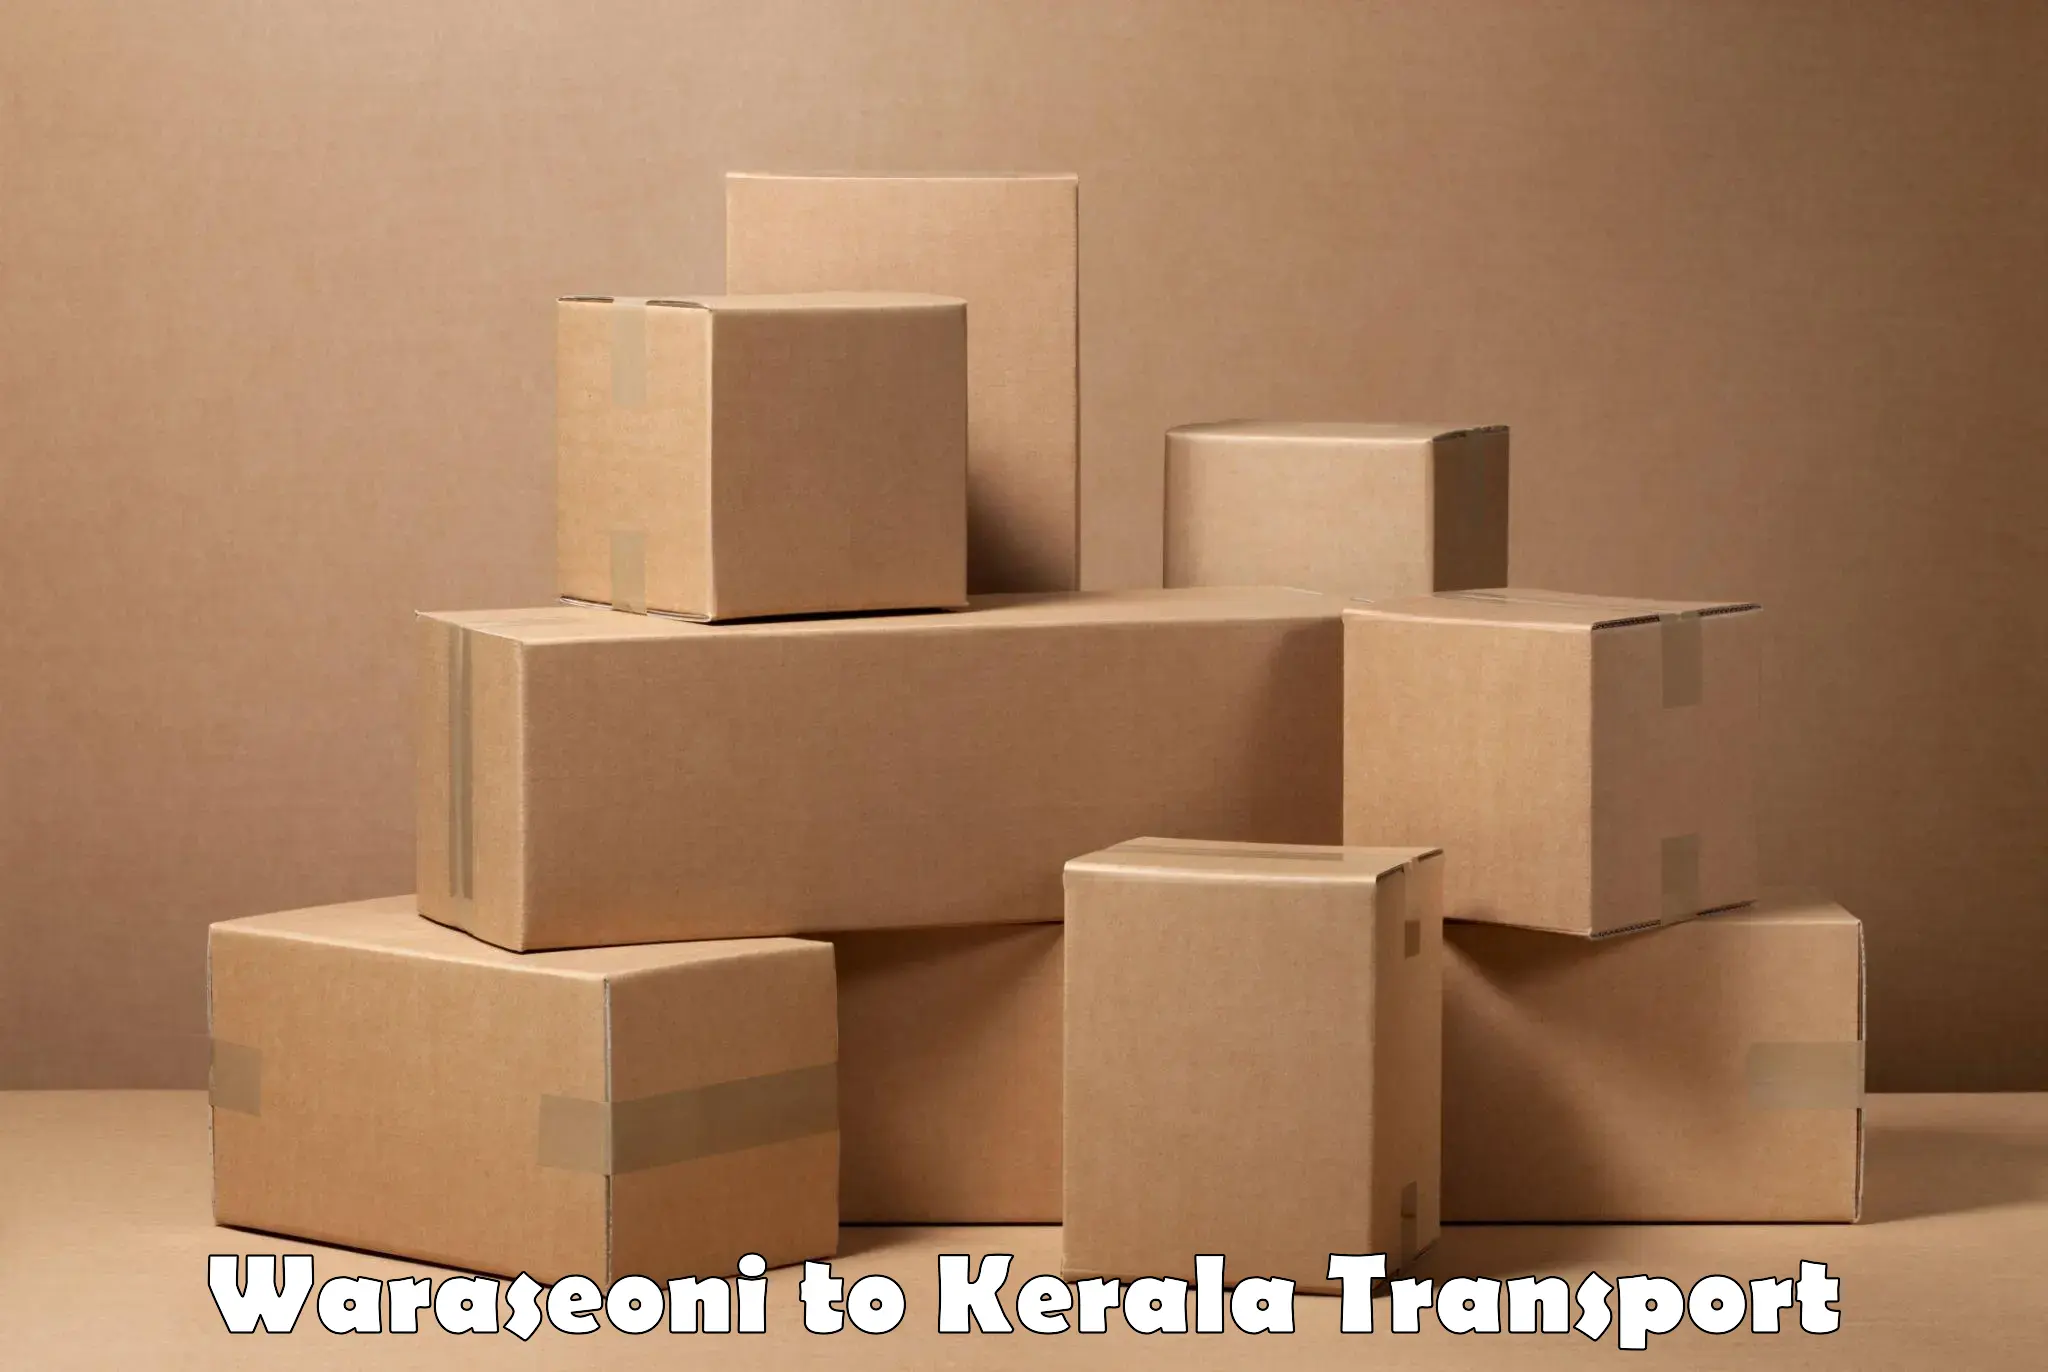 Daily transport service Waraseoni to Thrissur